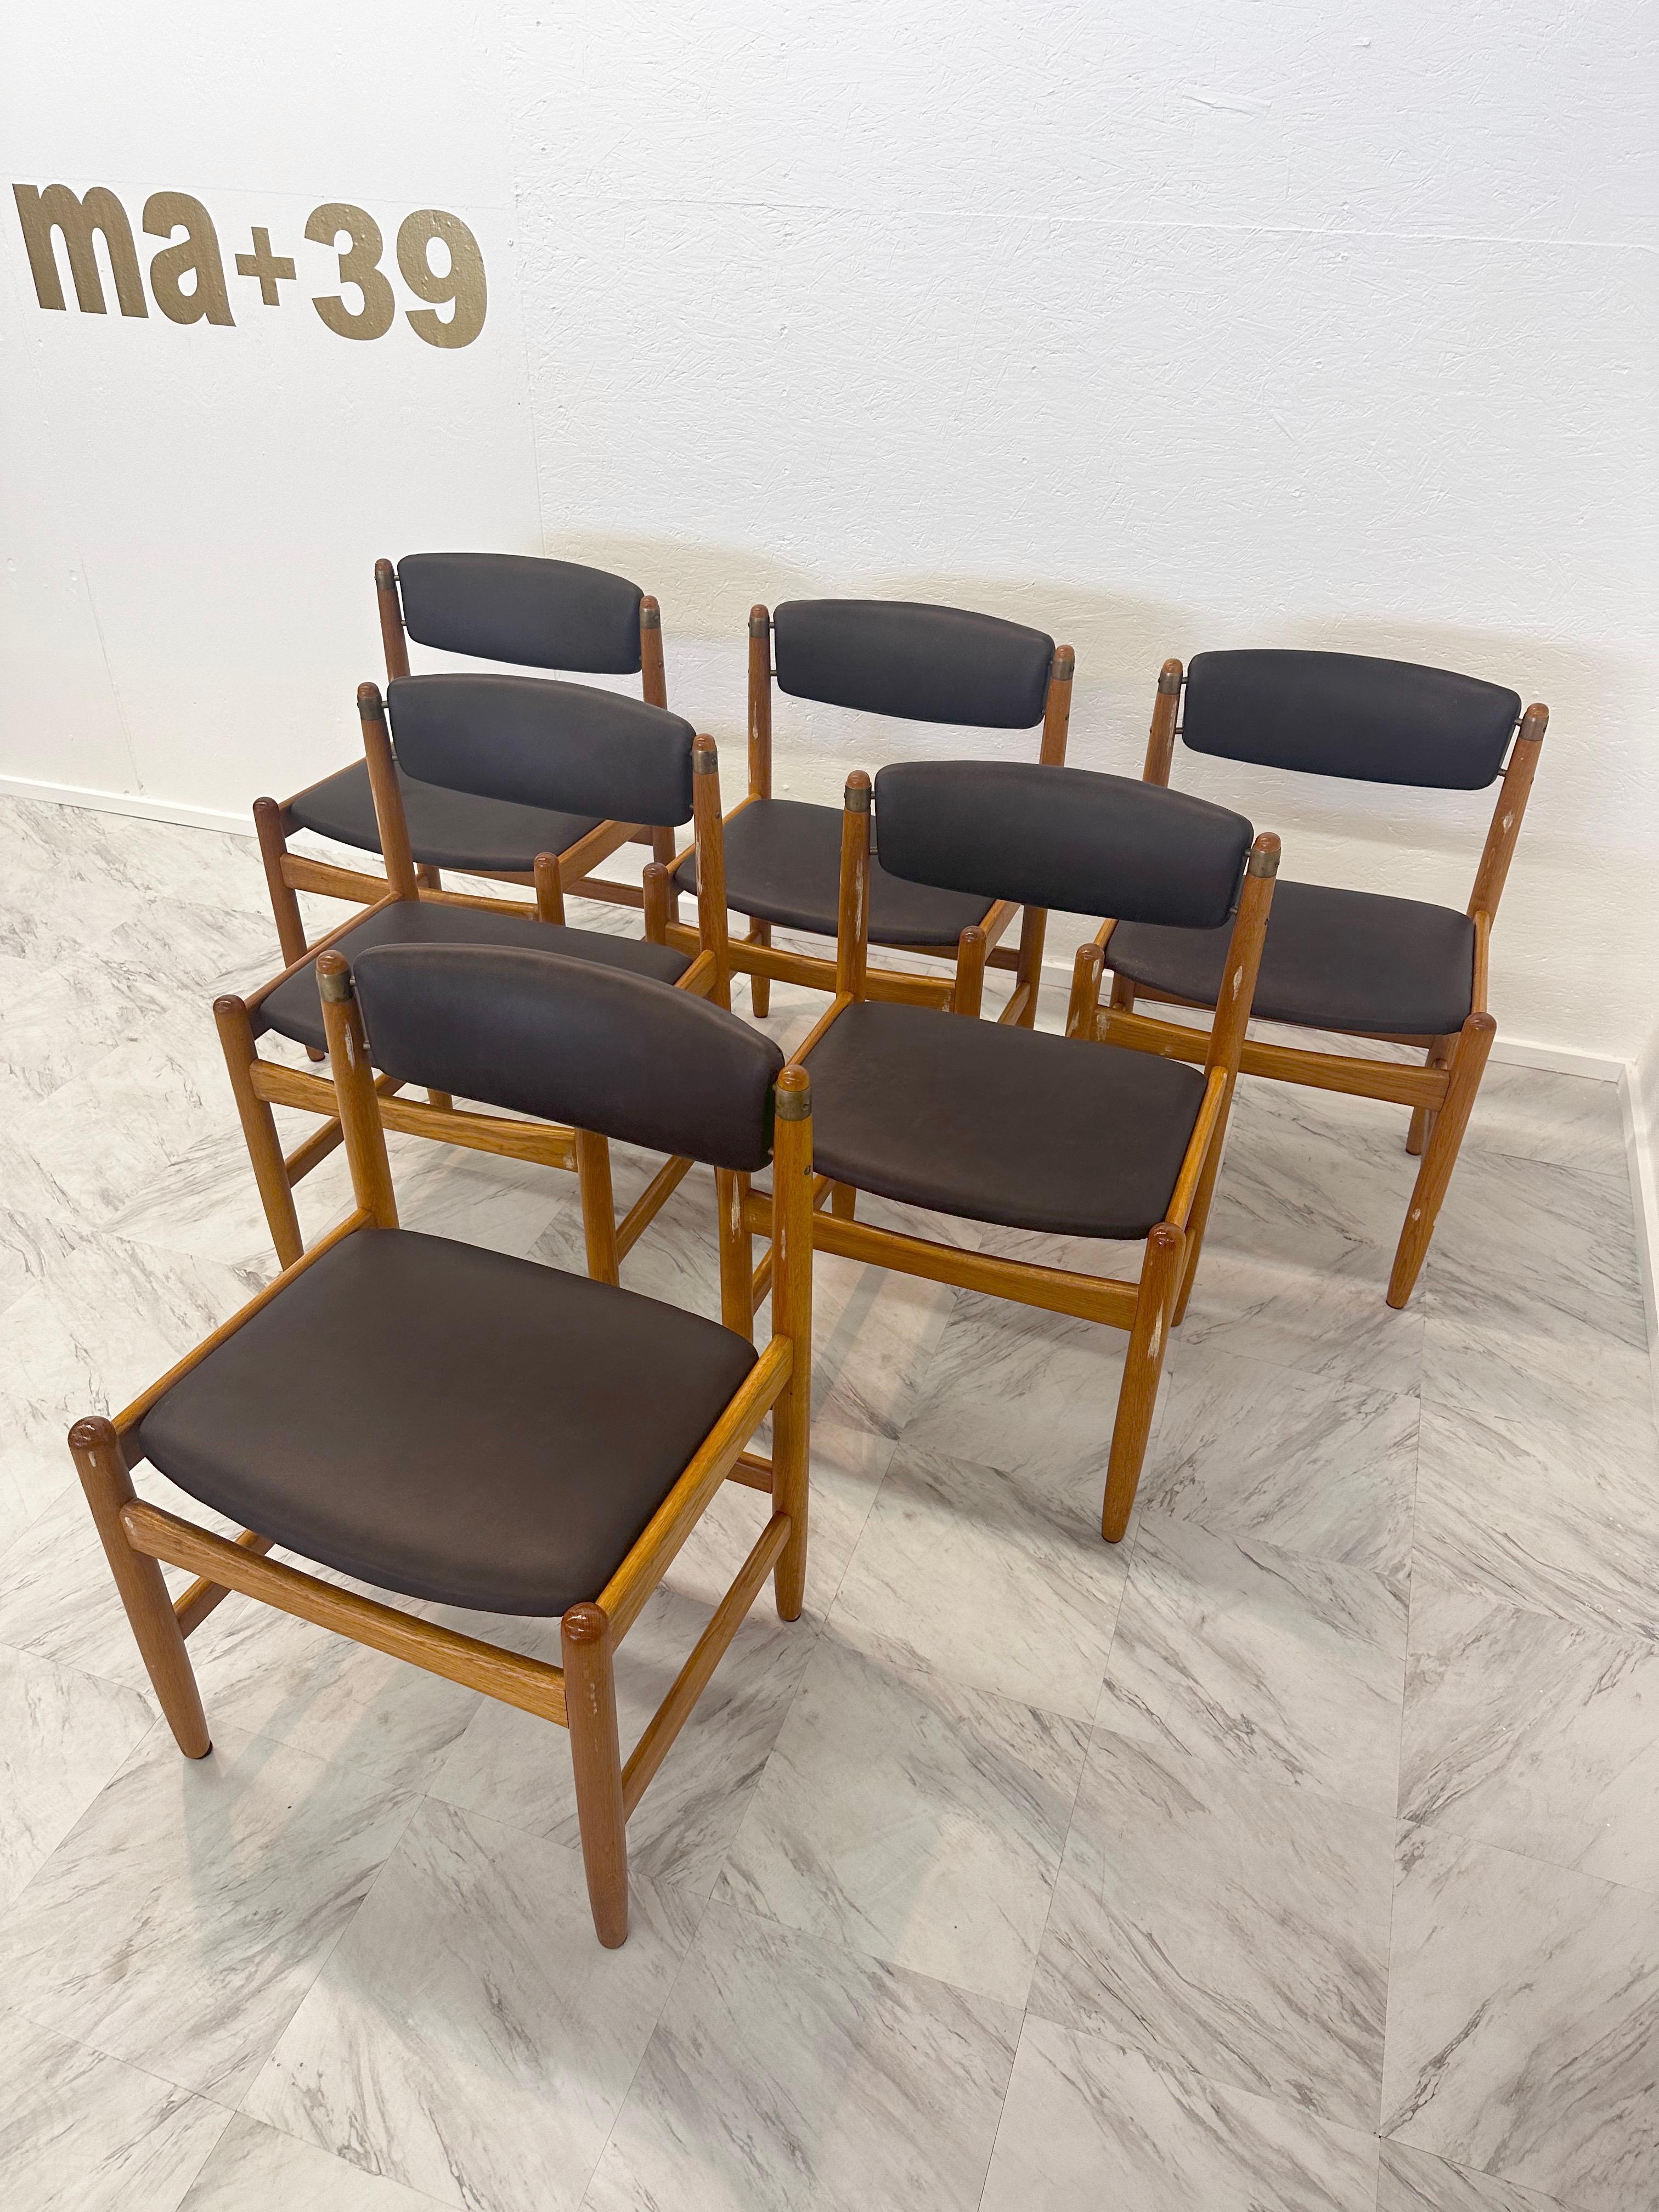 This set of 6 Model 537 Oresund chairs was designed by Borge Mogensen for Karl Andersson & Söner. It has been in production since 1955. These chairs stem from the first production period. The design was inspired by American Shaker furniture. It is